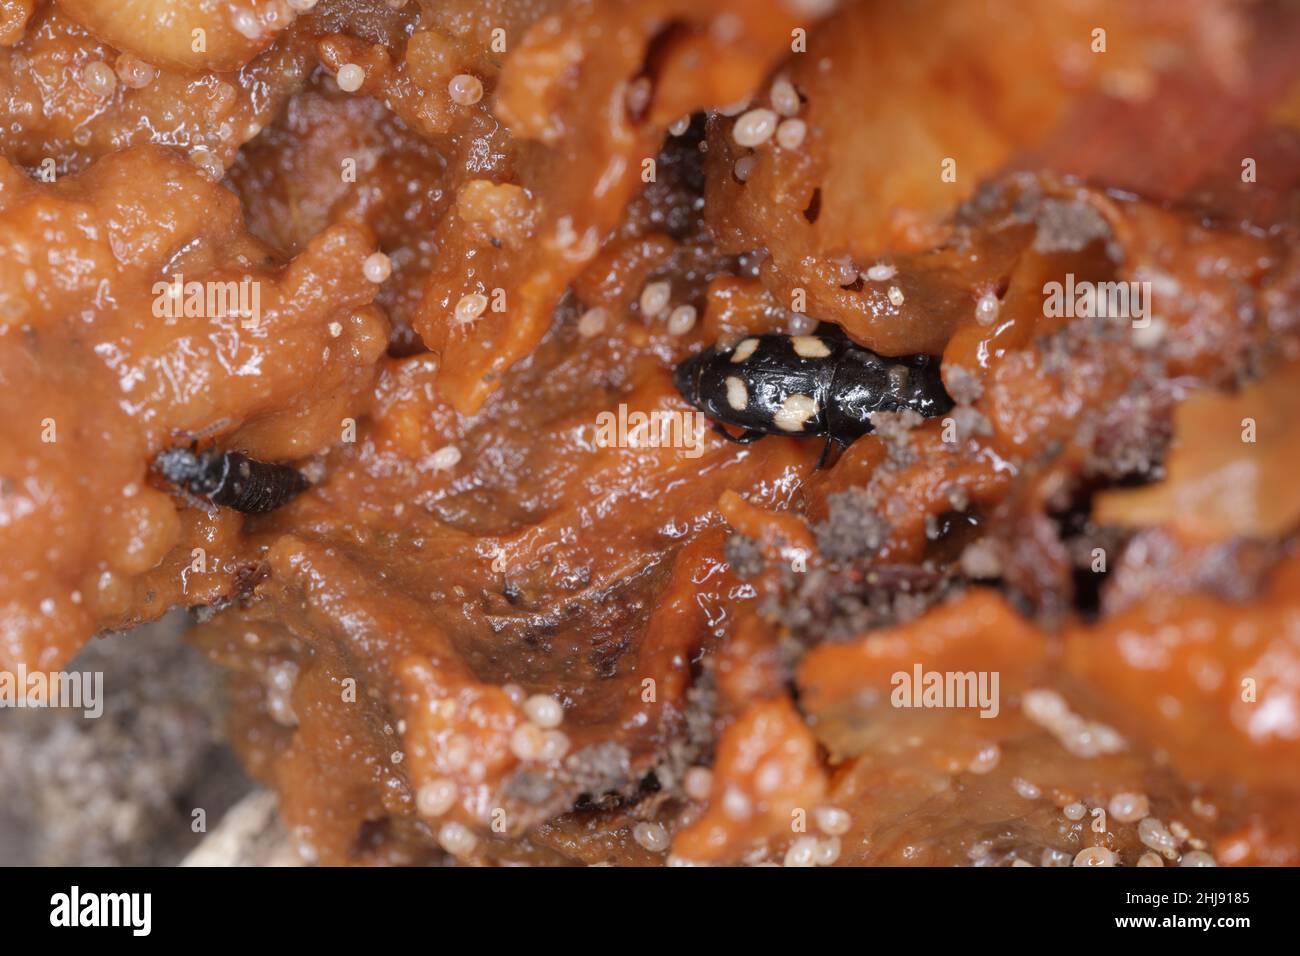 Staphylinidae beetles, Glischrochilus and mites in rotting onions. Stock Photo